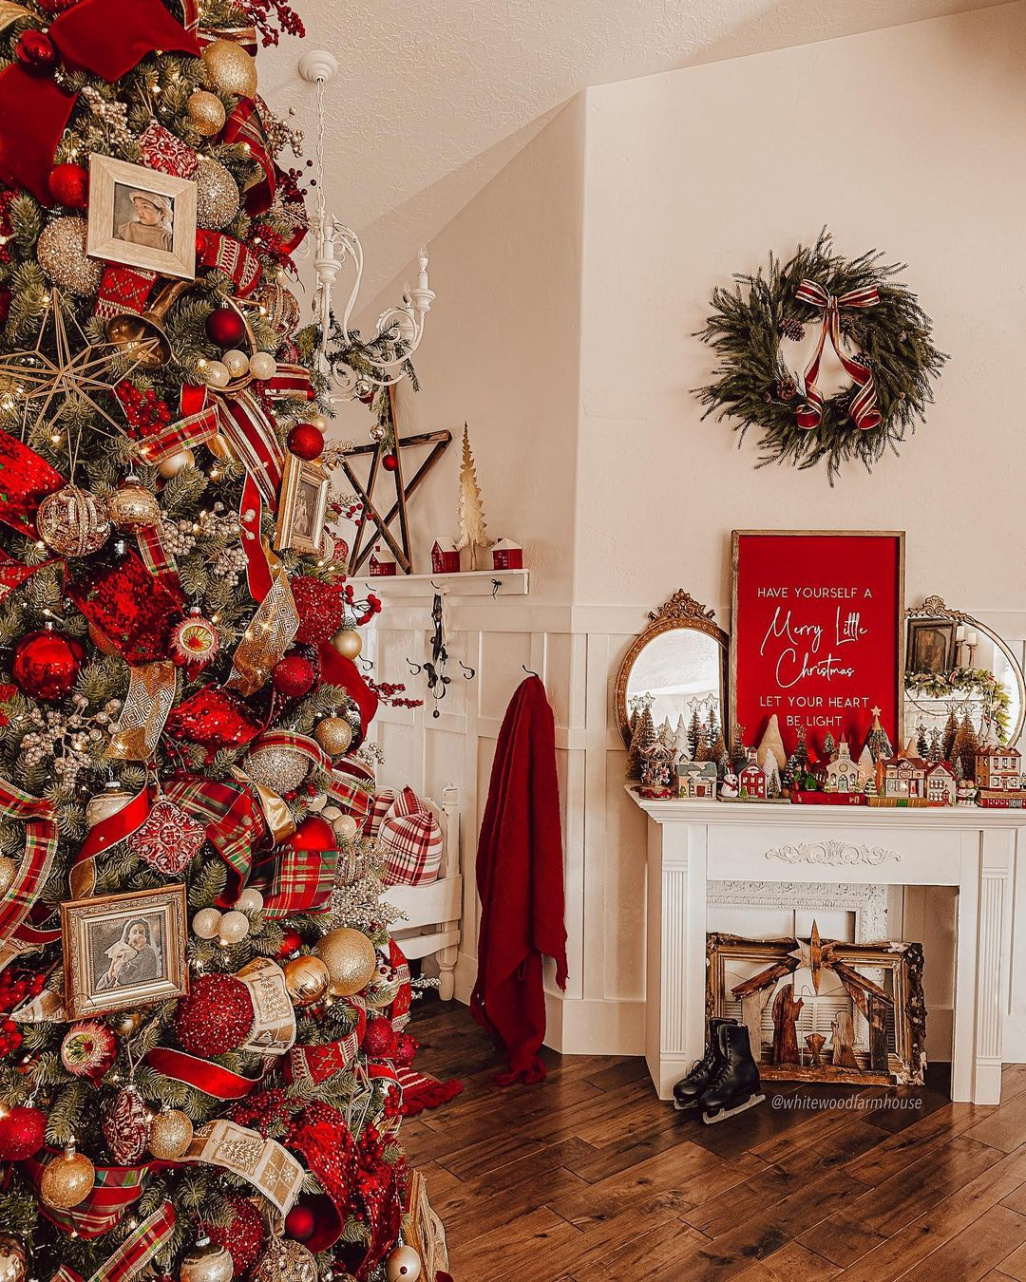 Days of Christmas Decorating Ideas from Interior Designers